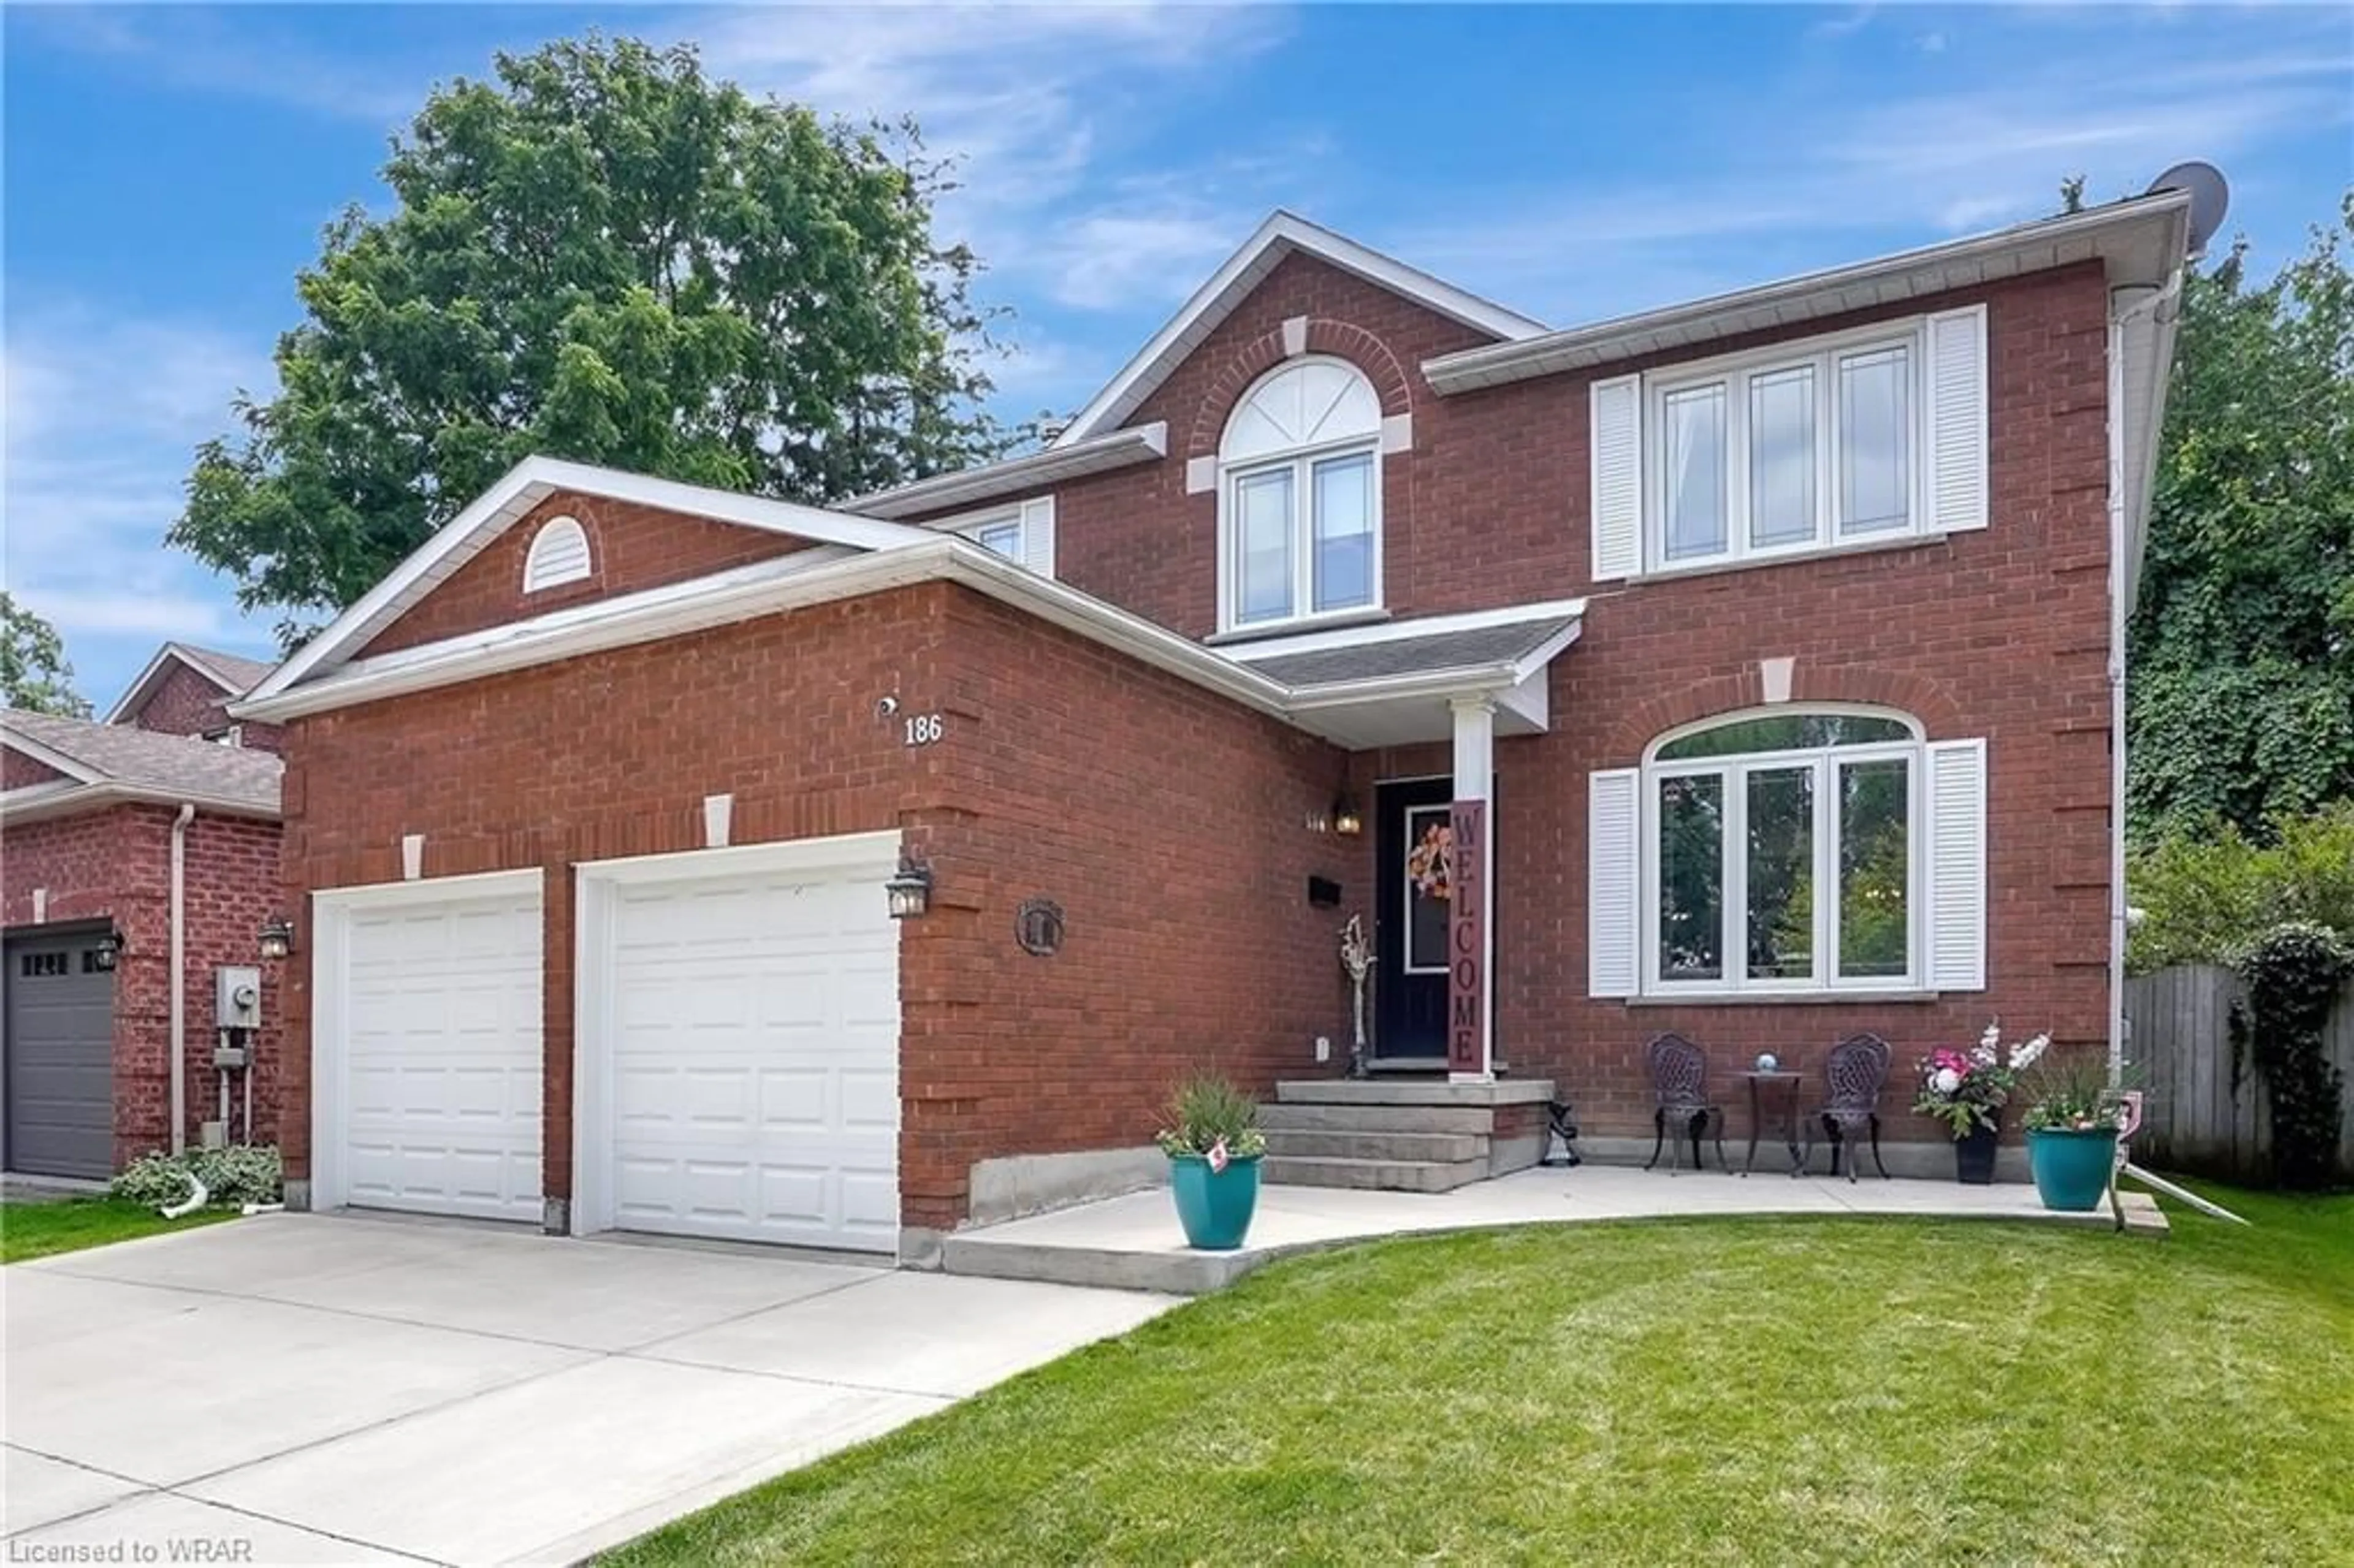 Home with brick exterior material for 186 General Dr, Kitchener Ontario N2K 3S6